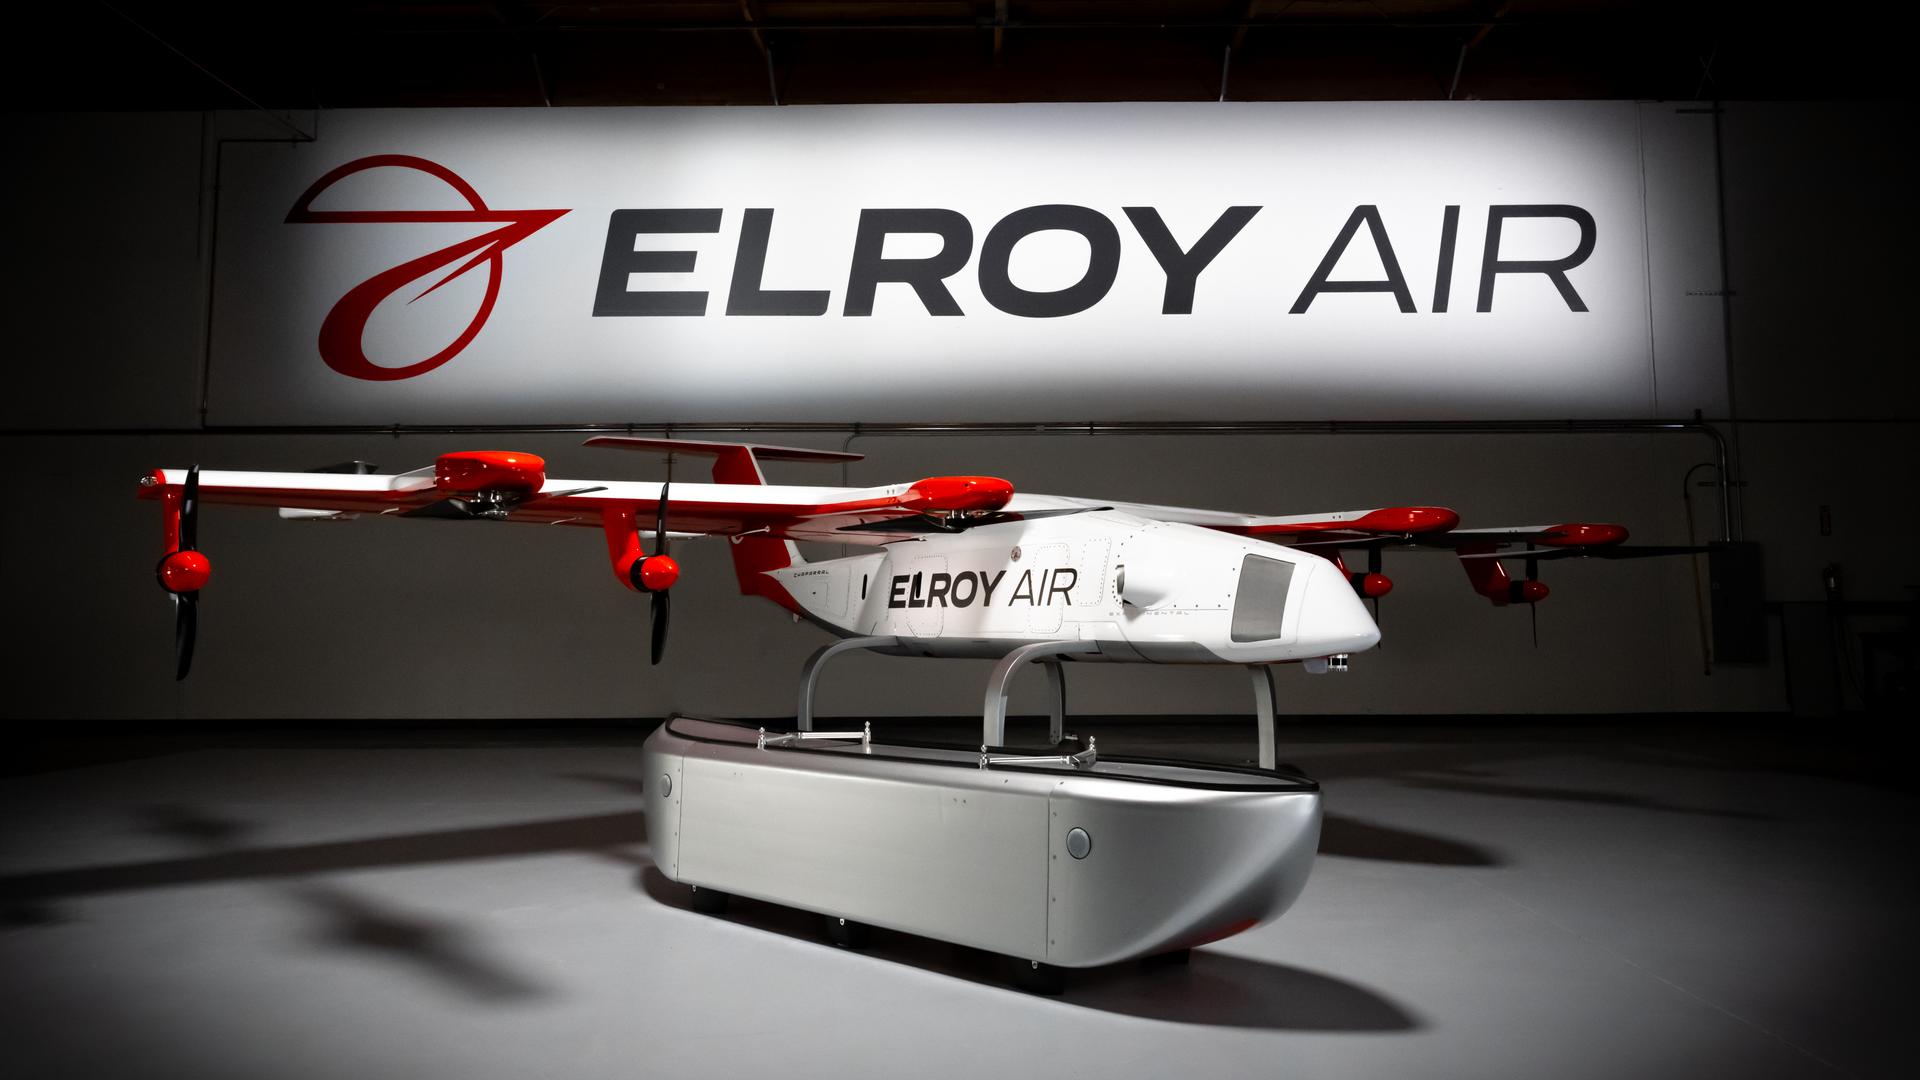 Could Cargo Drones Pave The Way For Passenger eVTOLs?